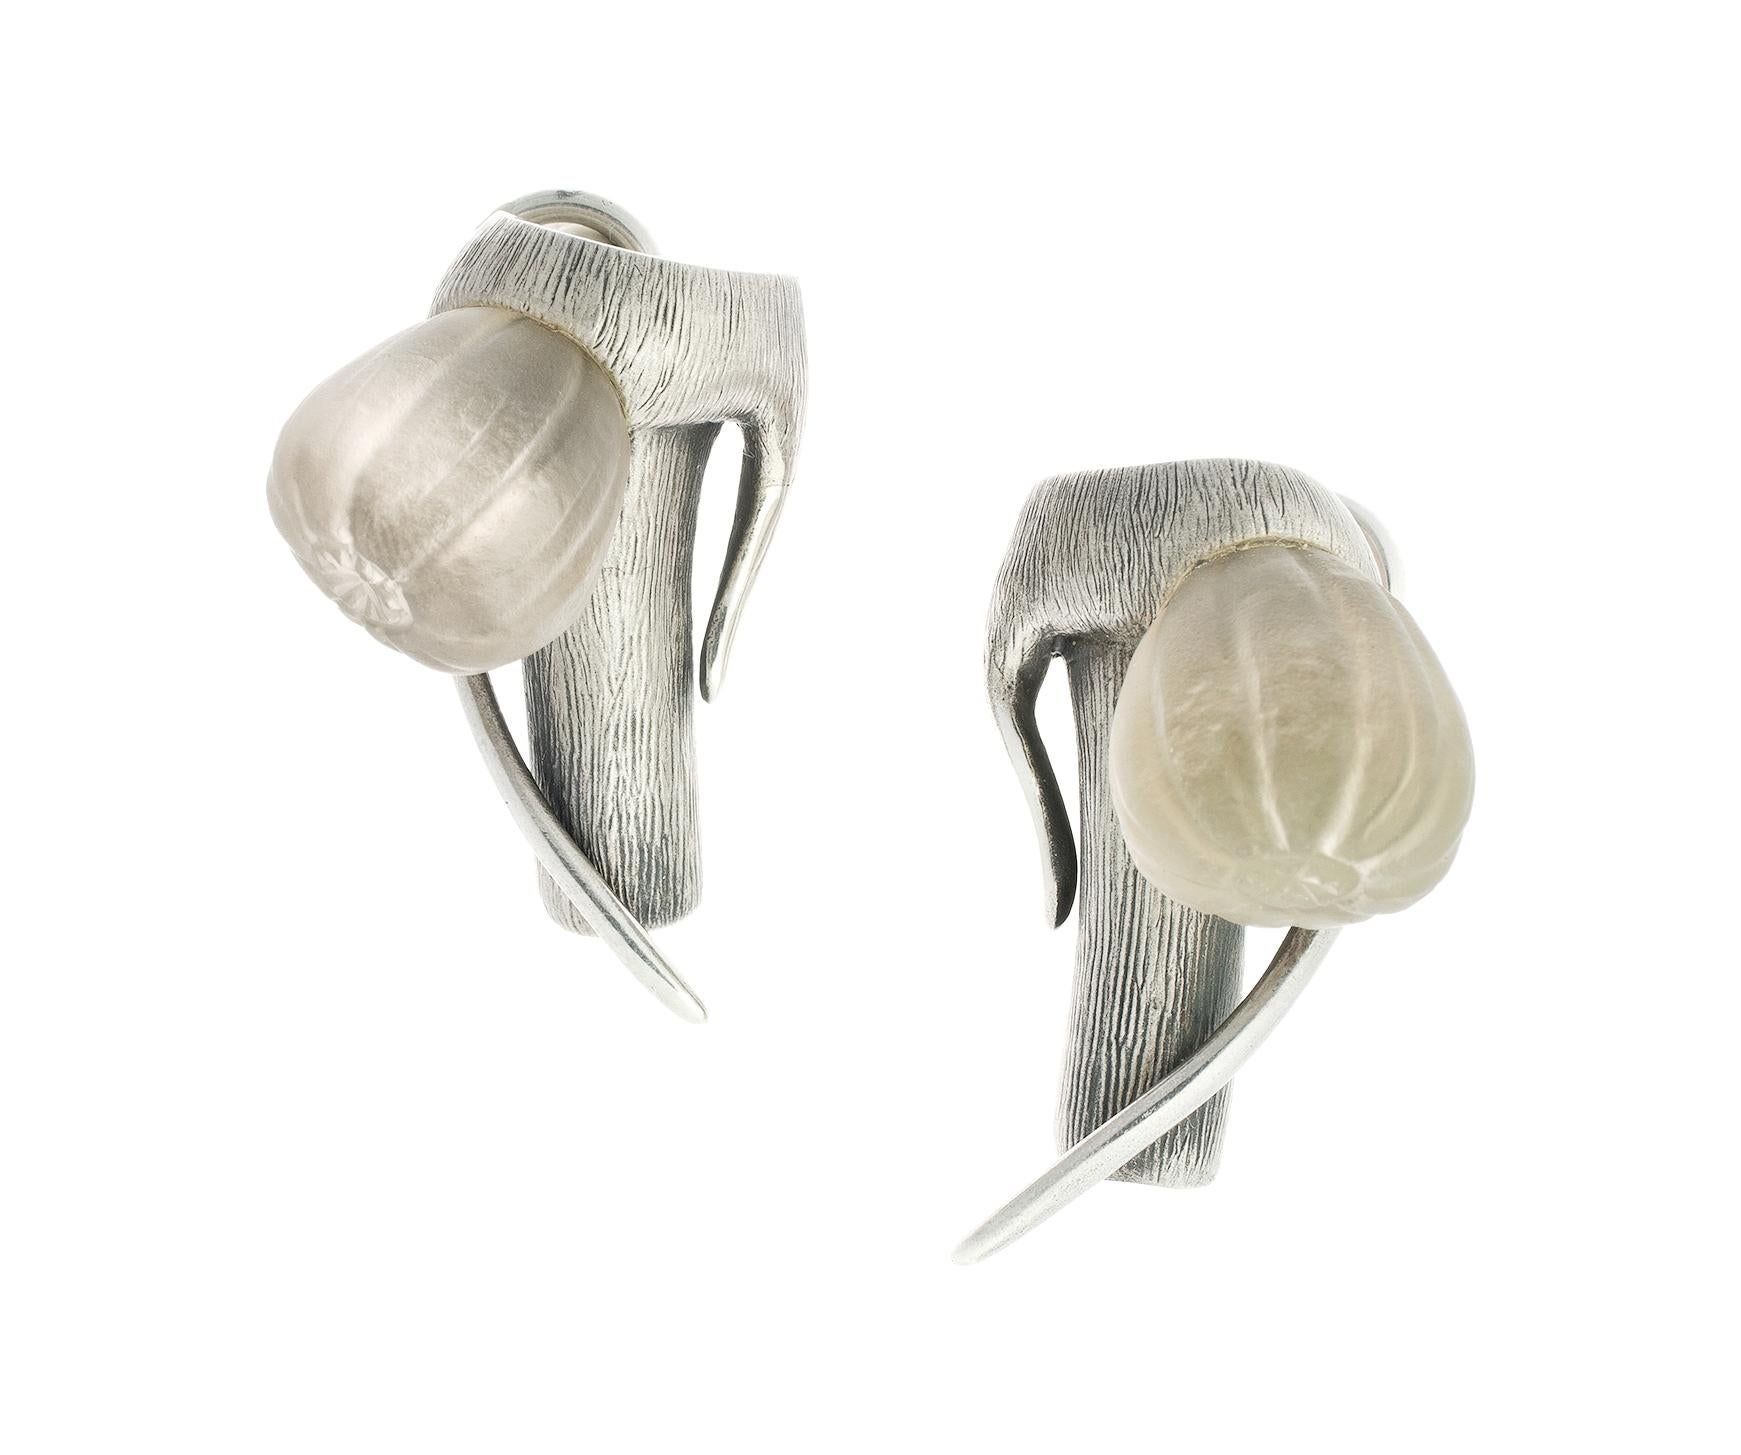 Contemporary Fig Earrings in Sterling Silver with Smoky Quartzes by the Artist For Sale 4